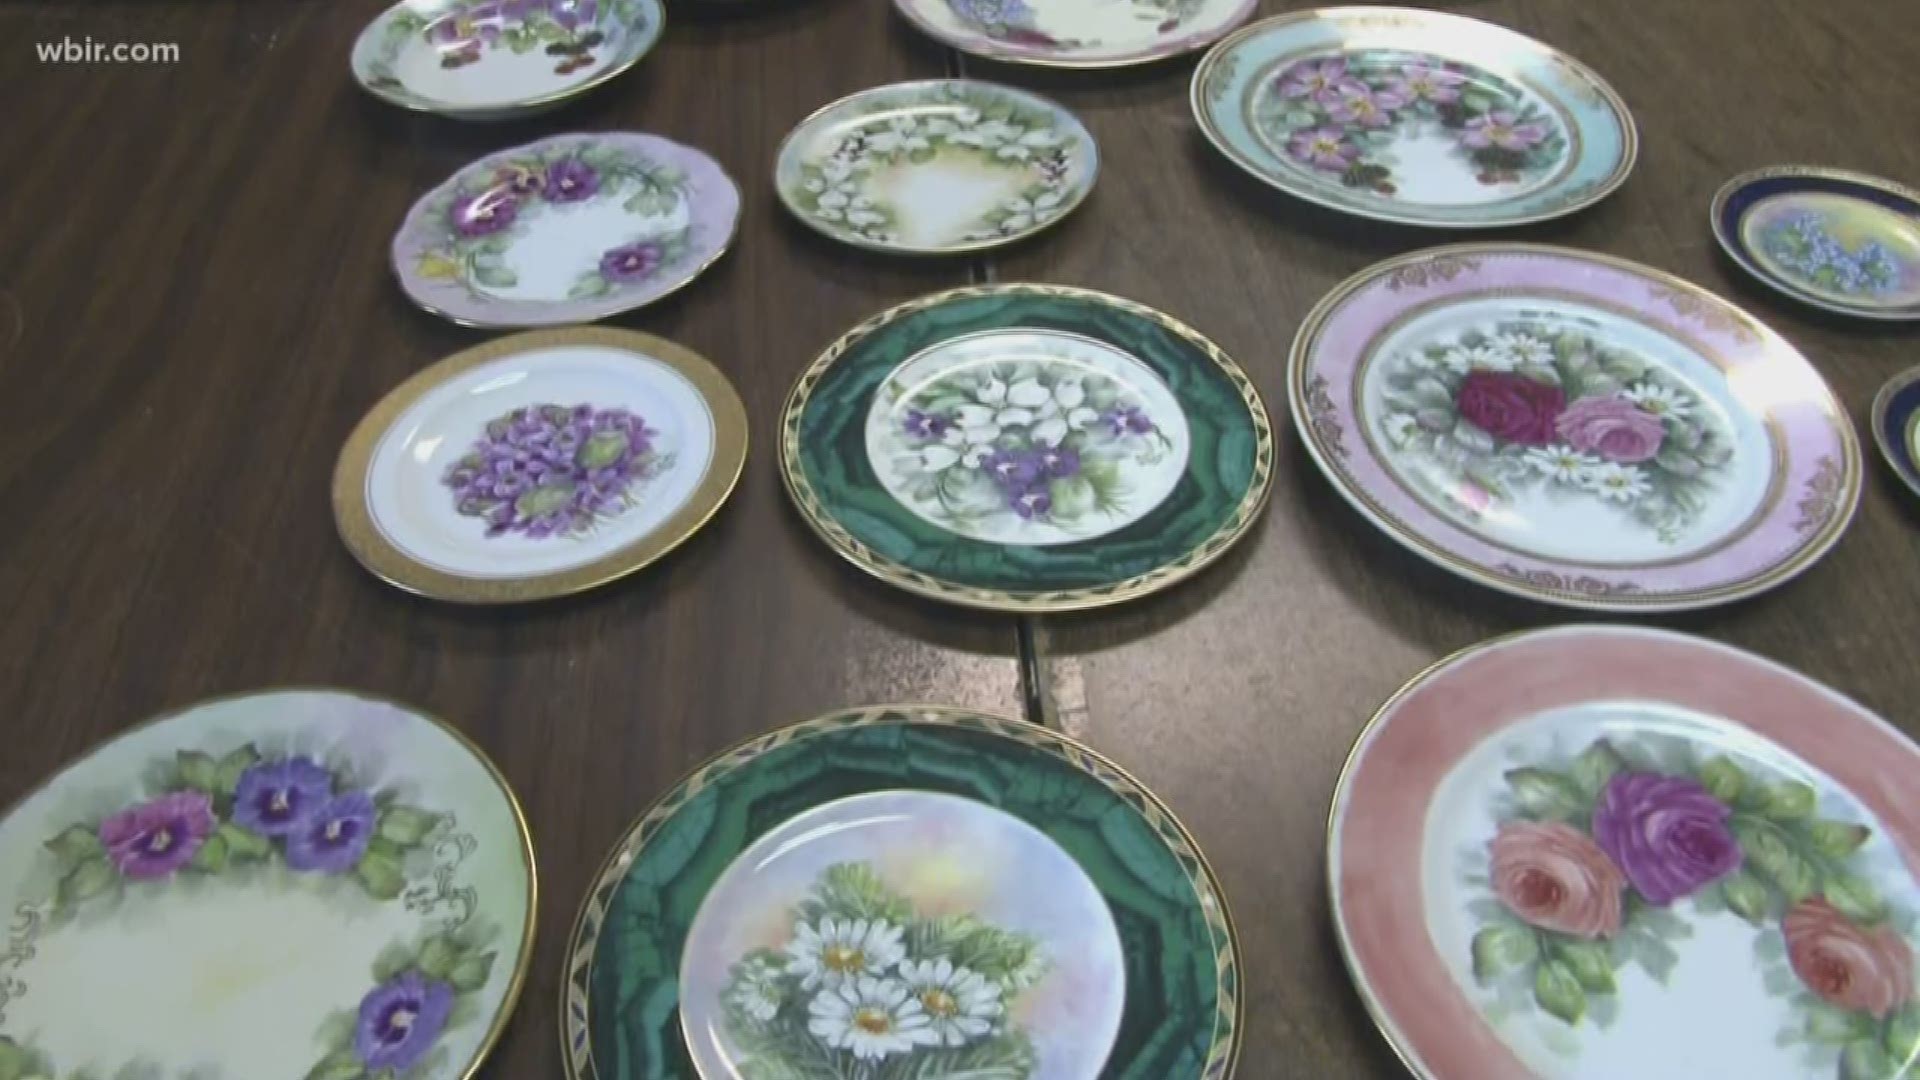 Porcelain artist Ruth Widener teaches students how to transform plain china into works of art